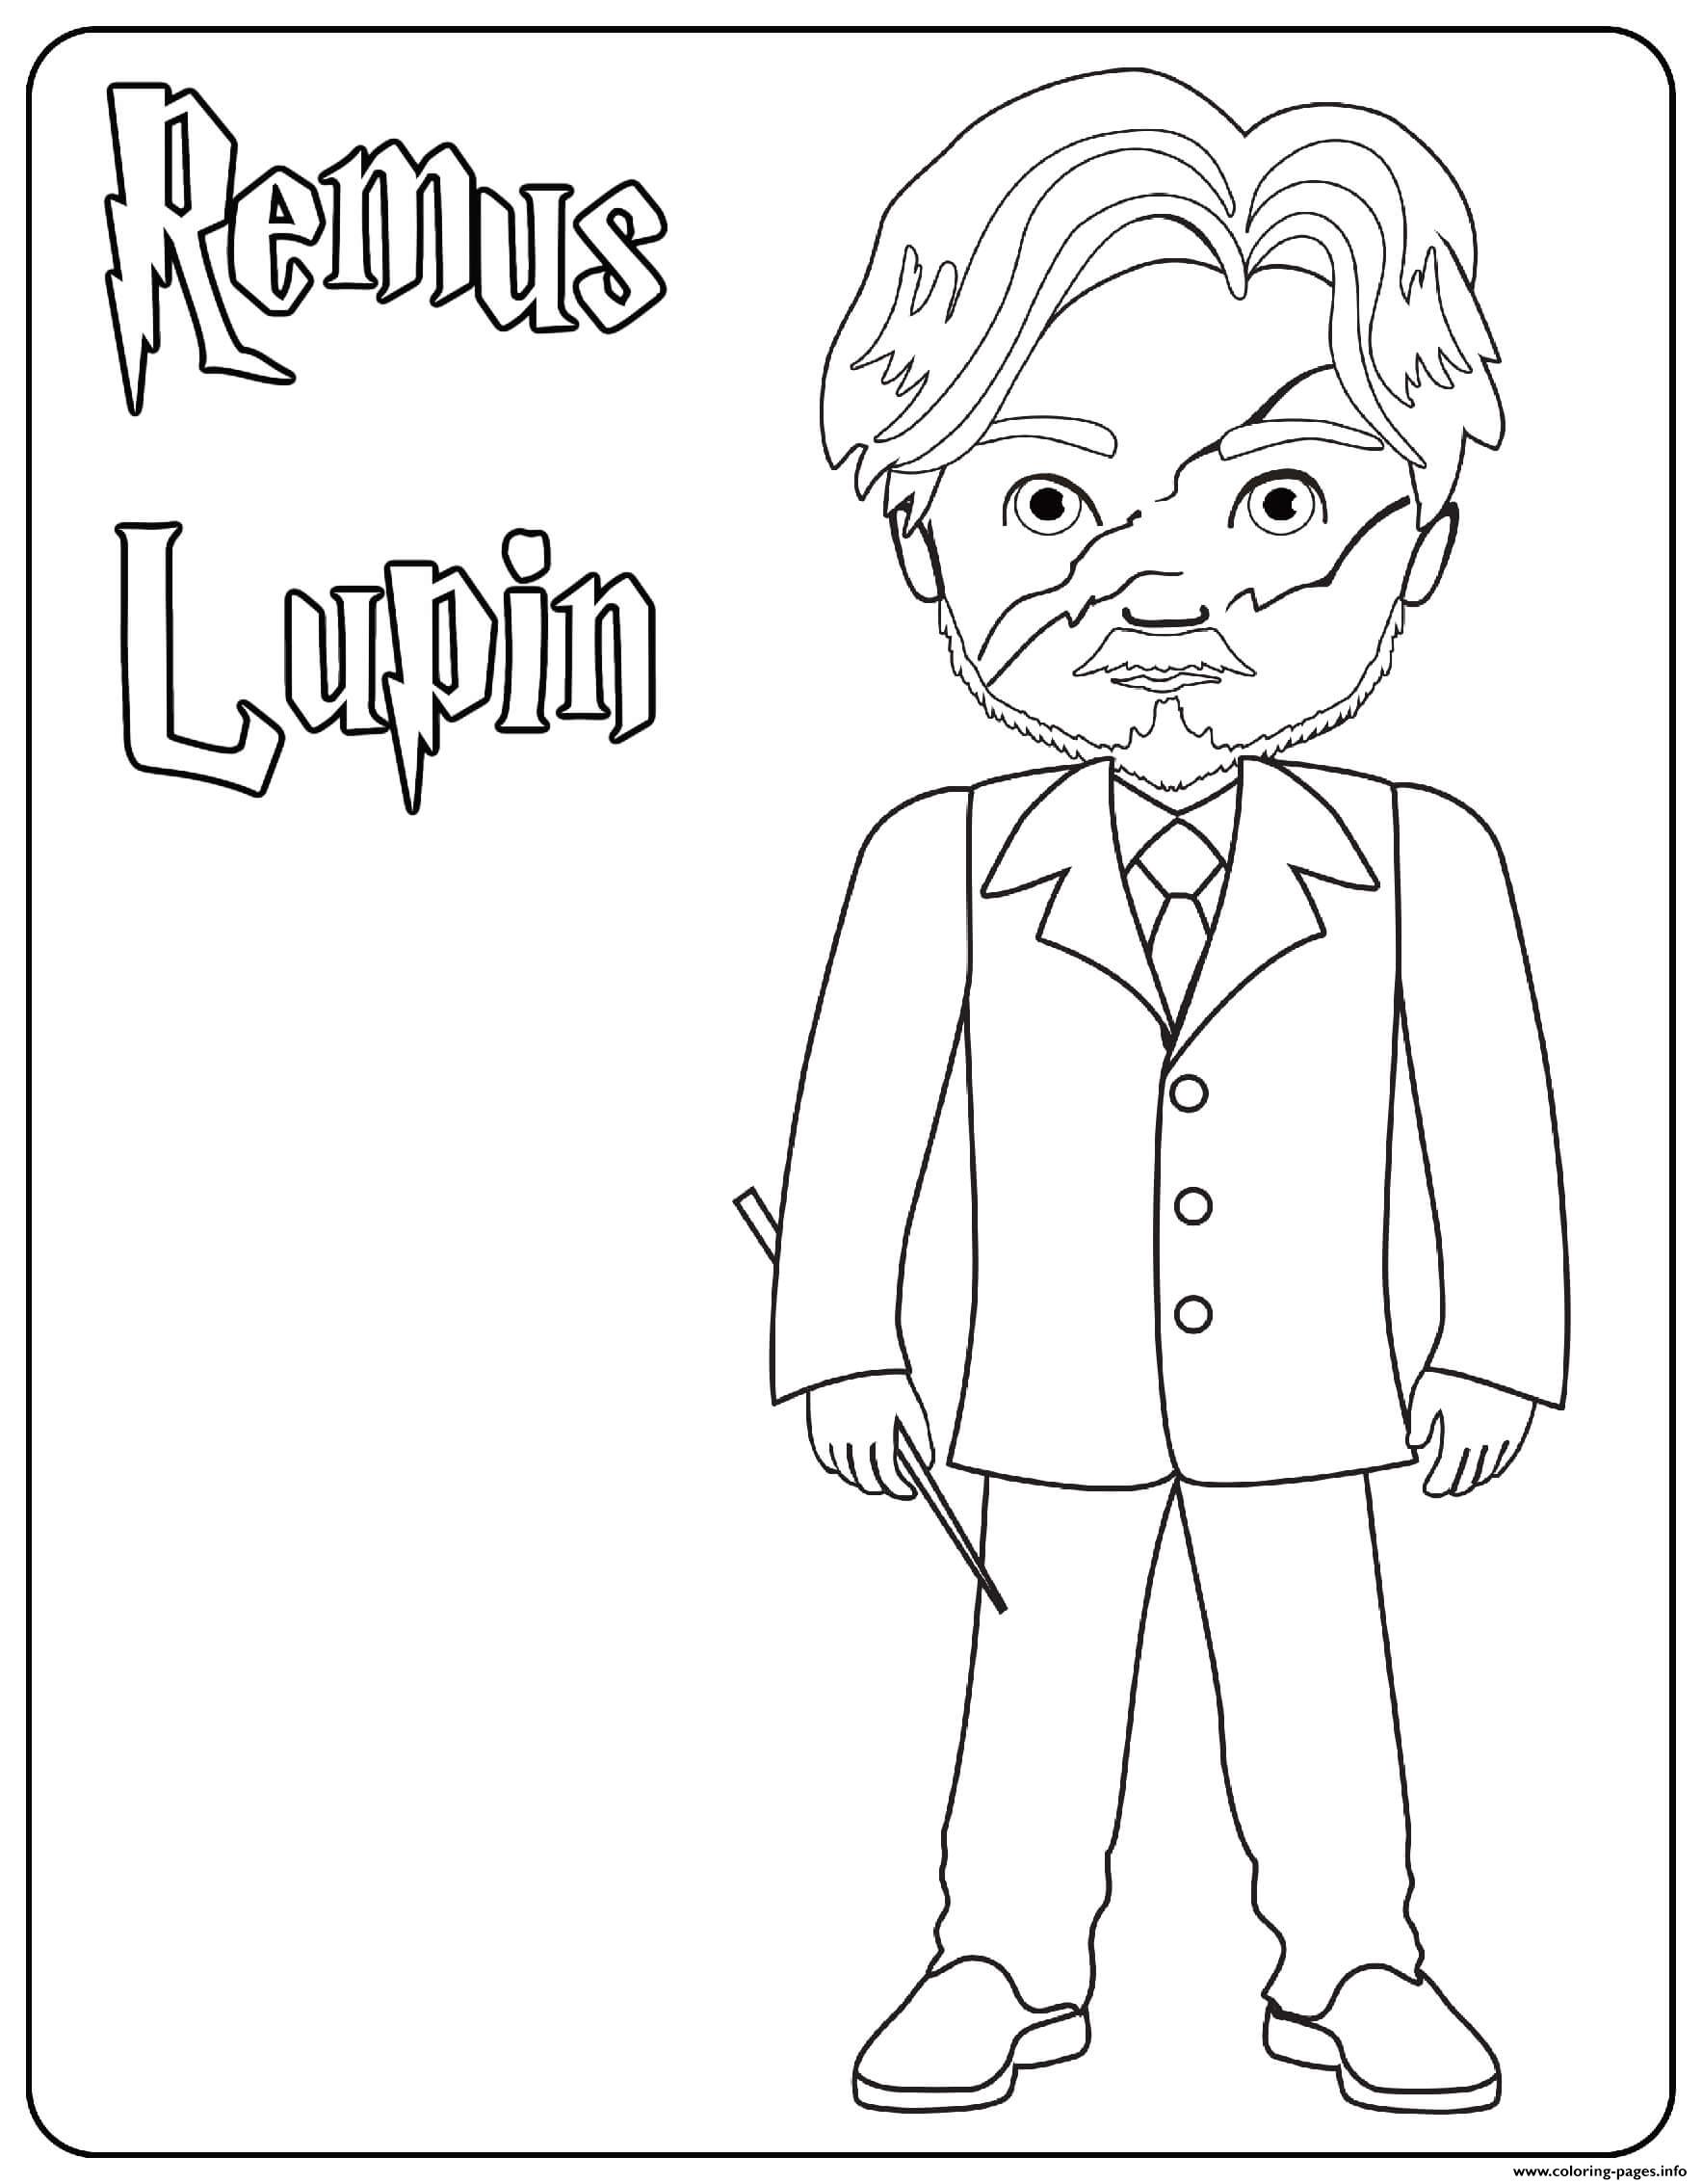 Remus Lupin coloring